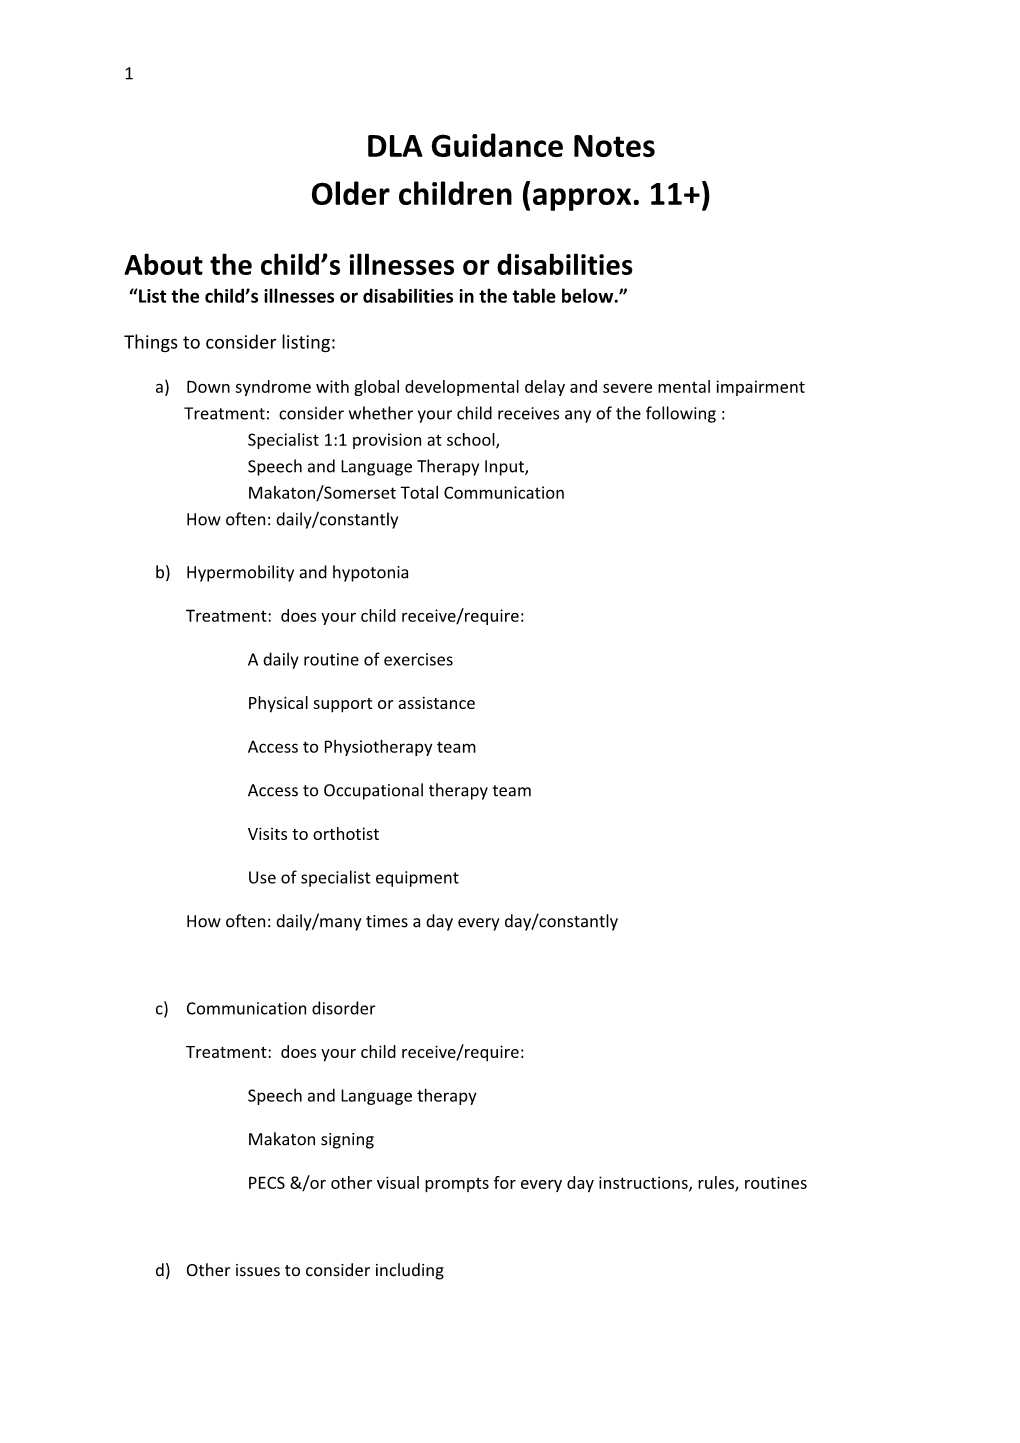 About the Child S Illnesses Or Disabilities